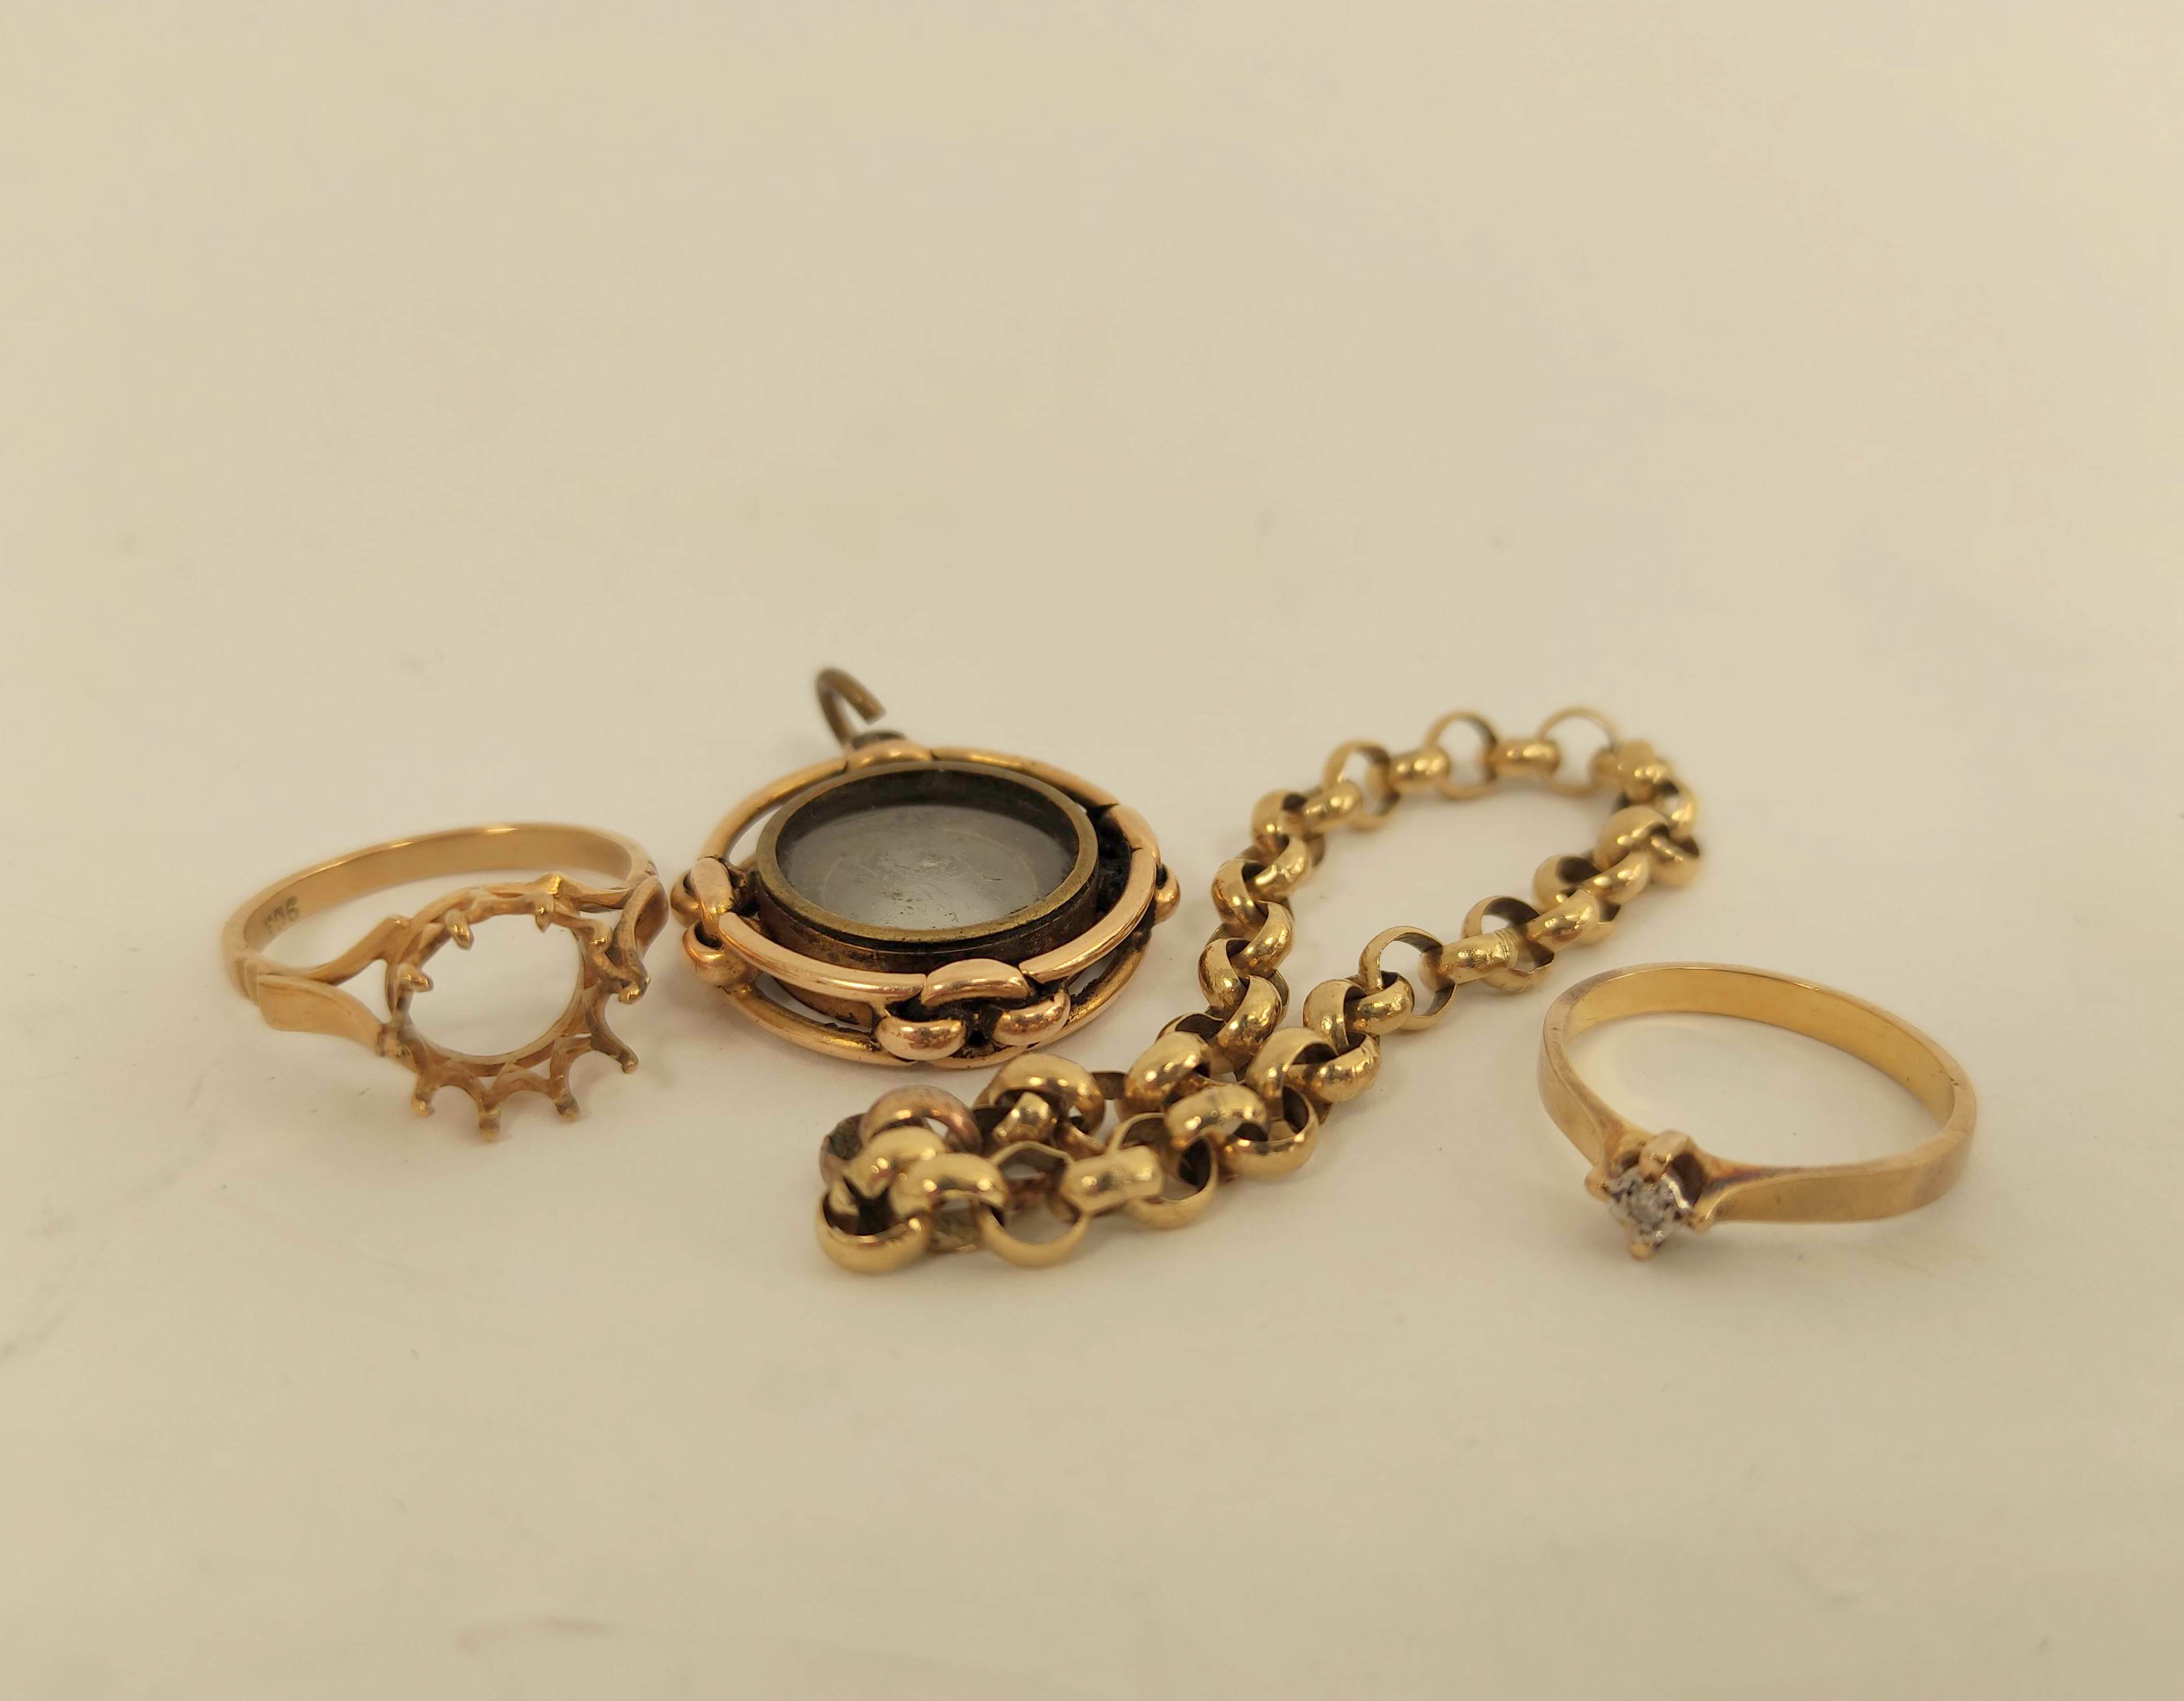 15ct gold compass charm, two rings and a piece of chain. 18g gross.